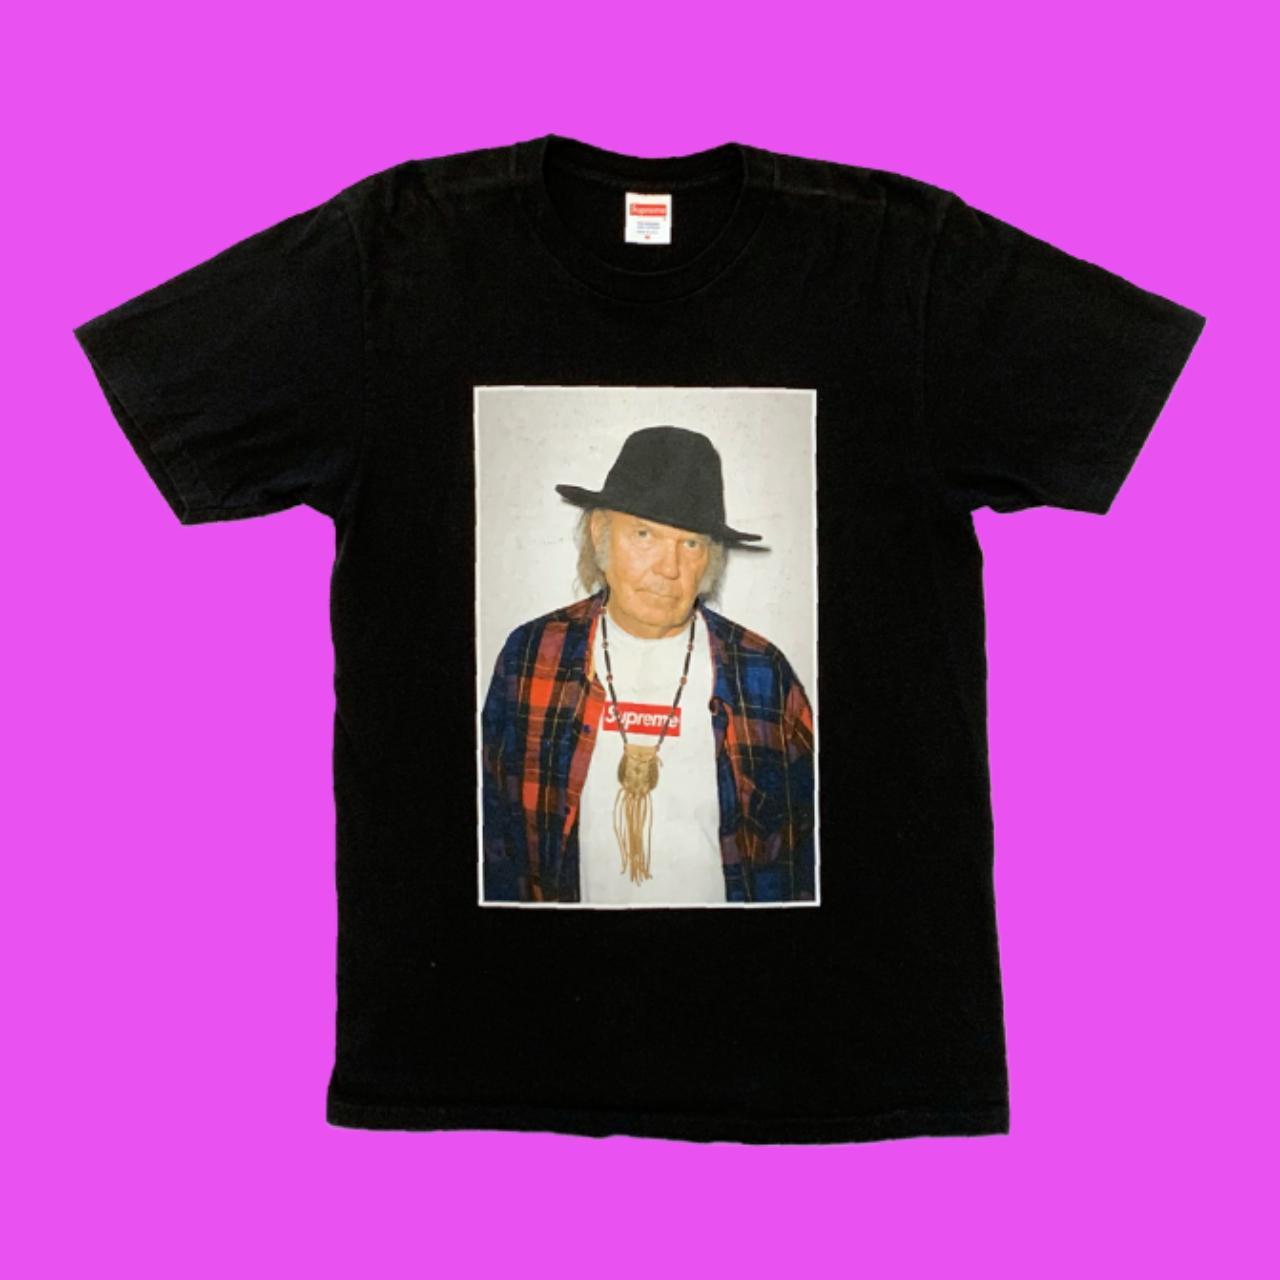 SUPREME, Neil Young Tee - Black - SS15, sized...